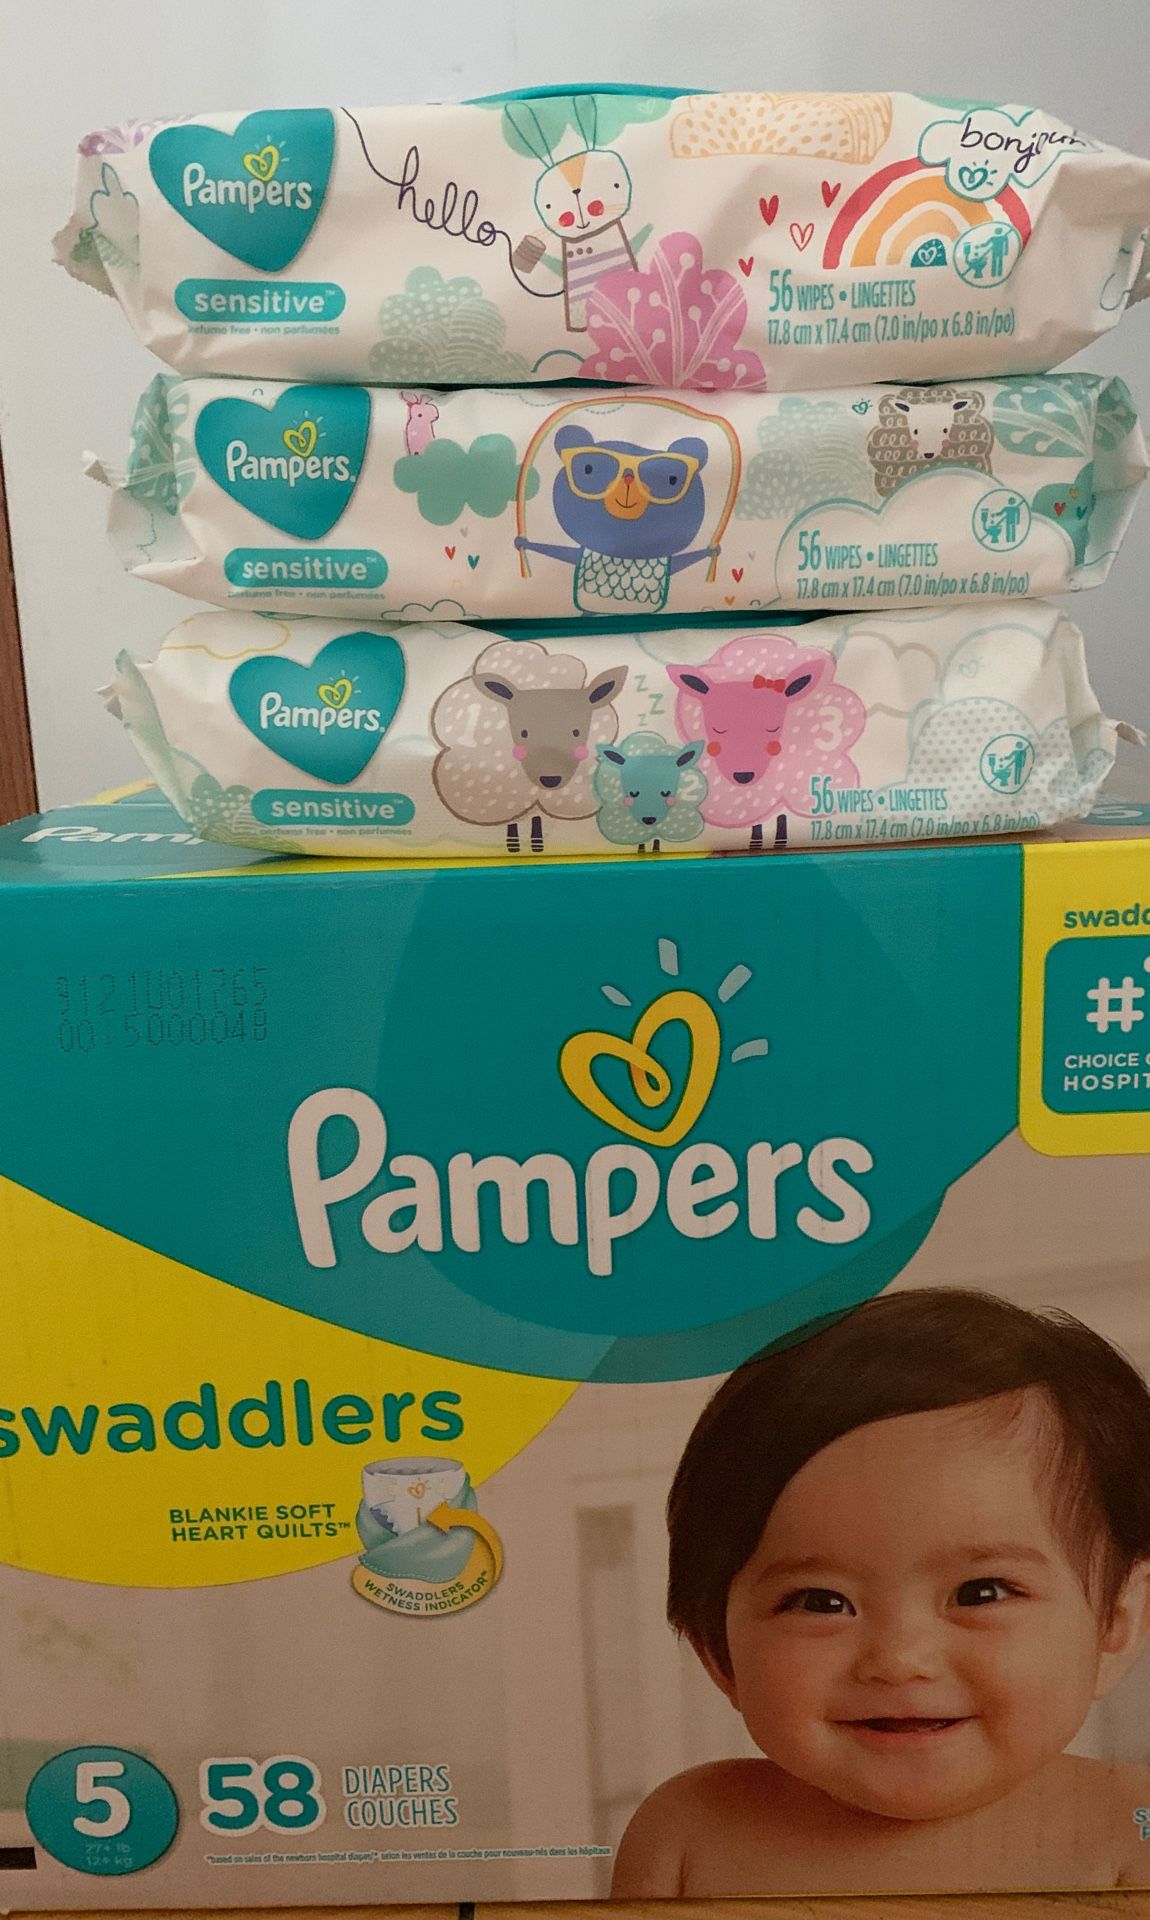 Pampers Swaddlers size 5 with 58 diapers and 3 wipes for $25